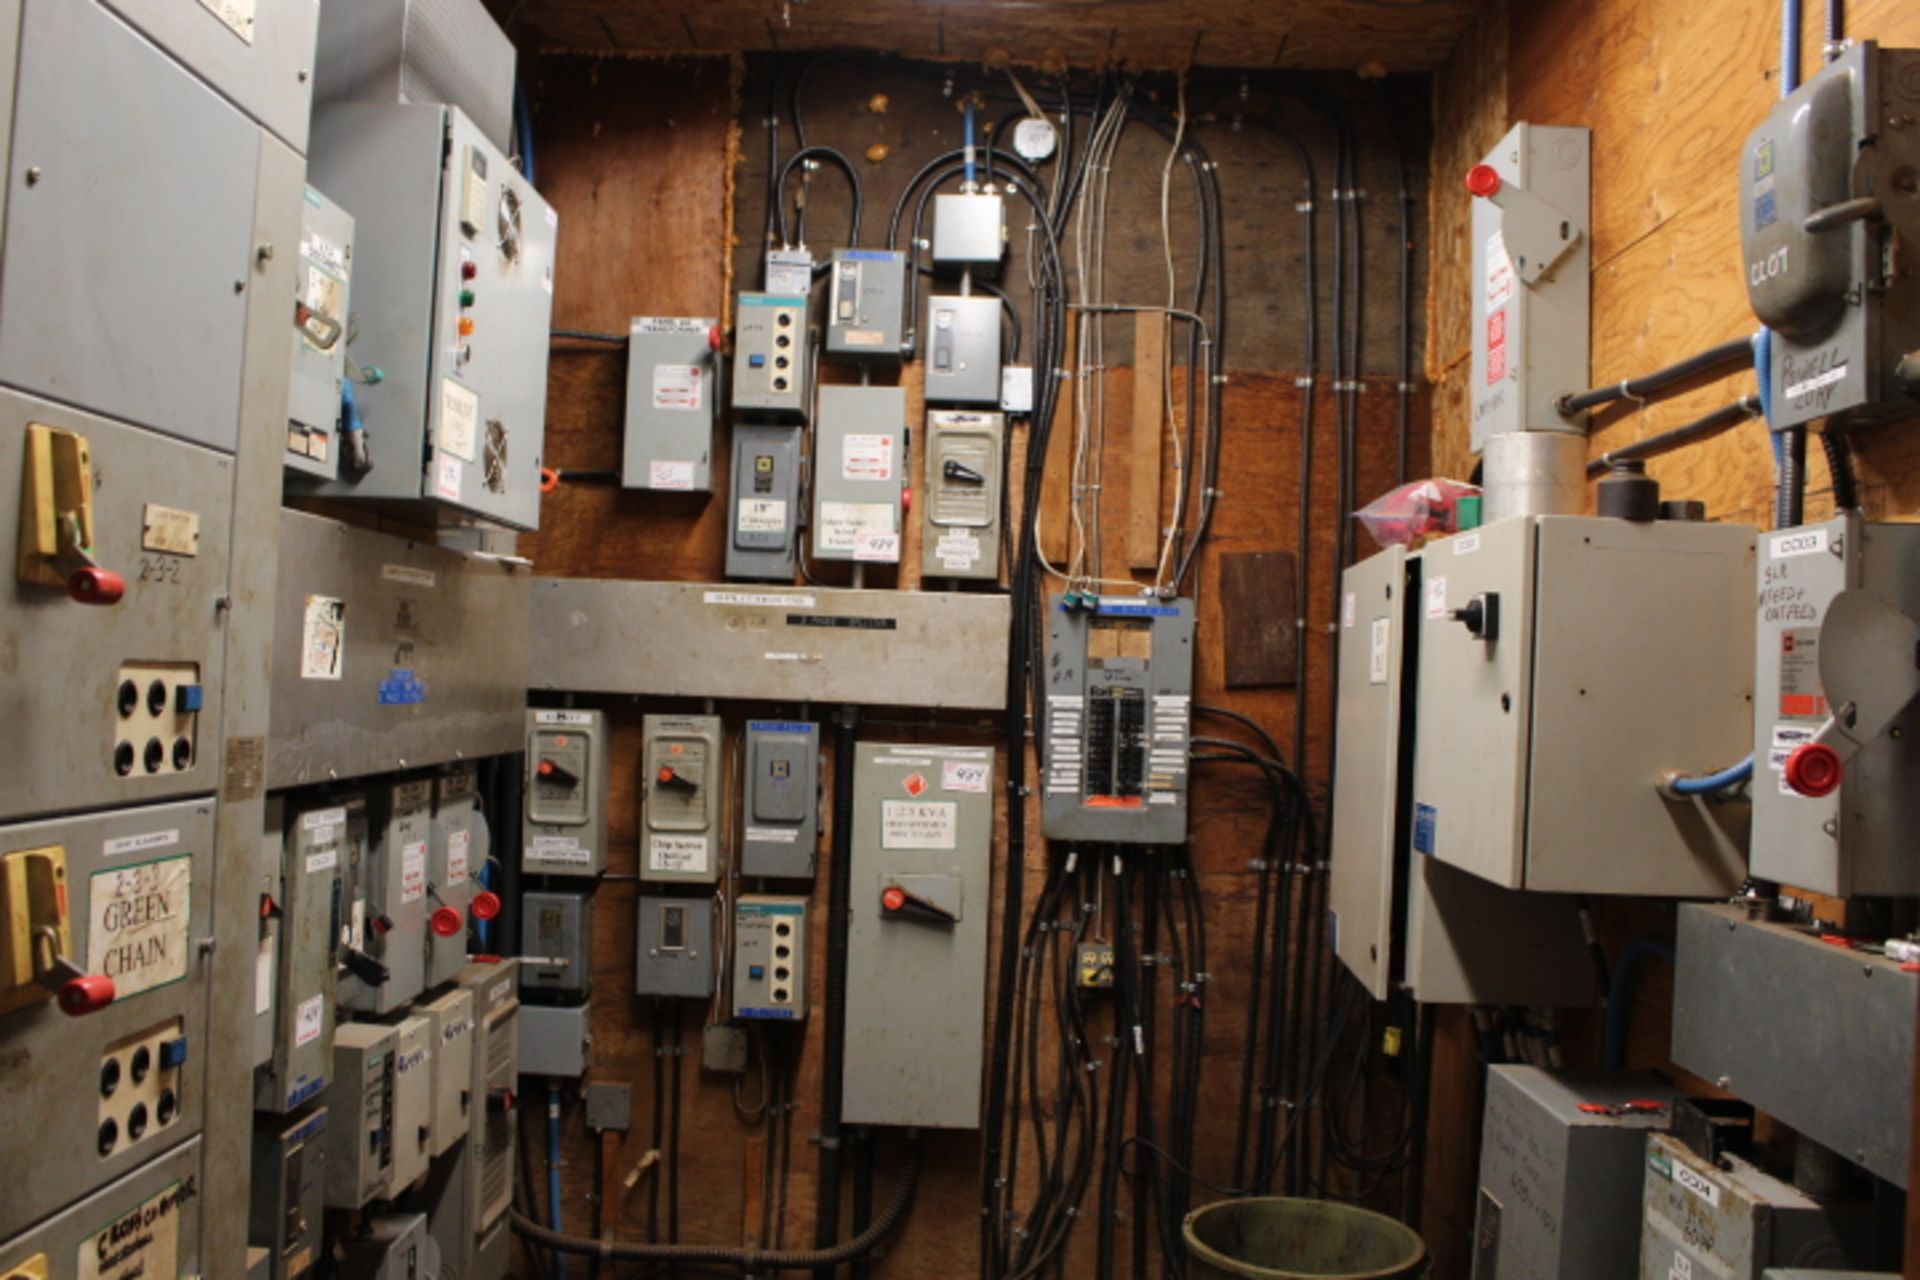 ALL REMAINING ELECTRICS EXCLUDING MARKED ITEMS